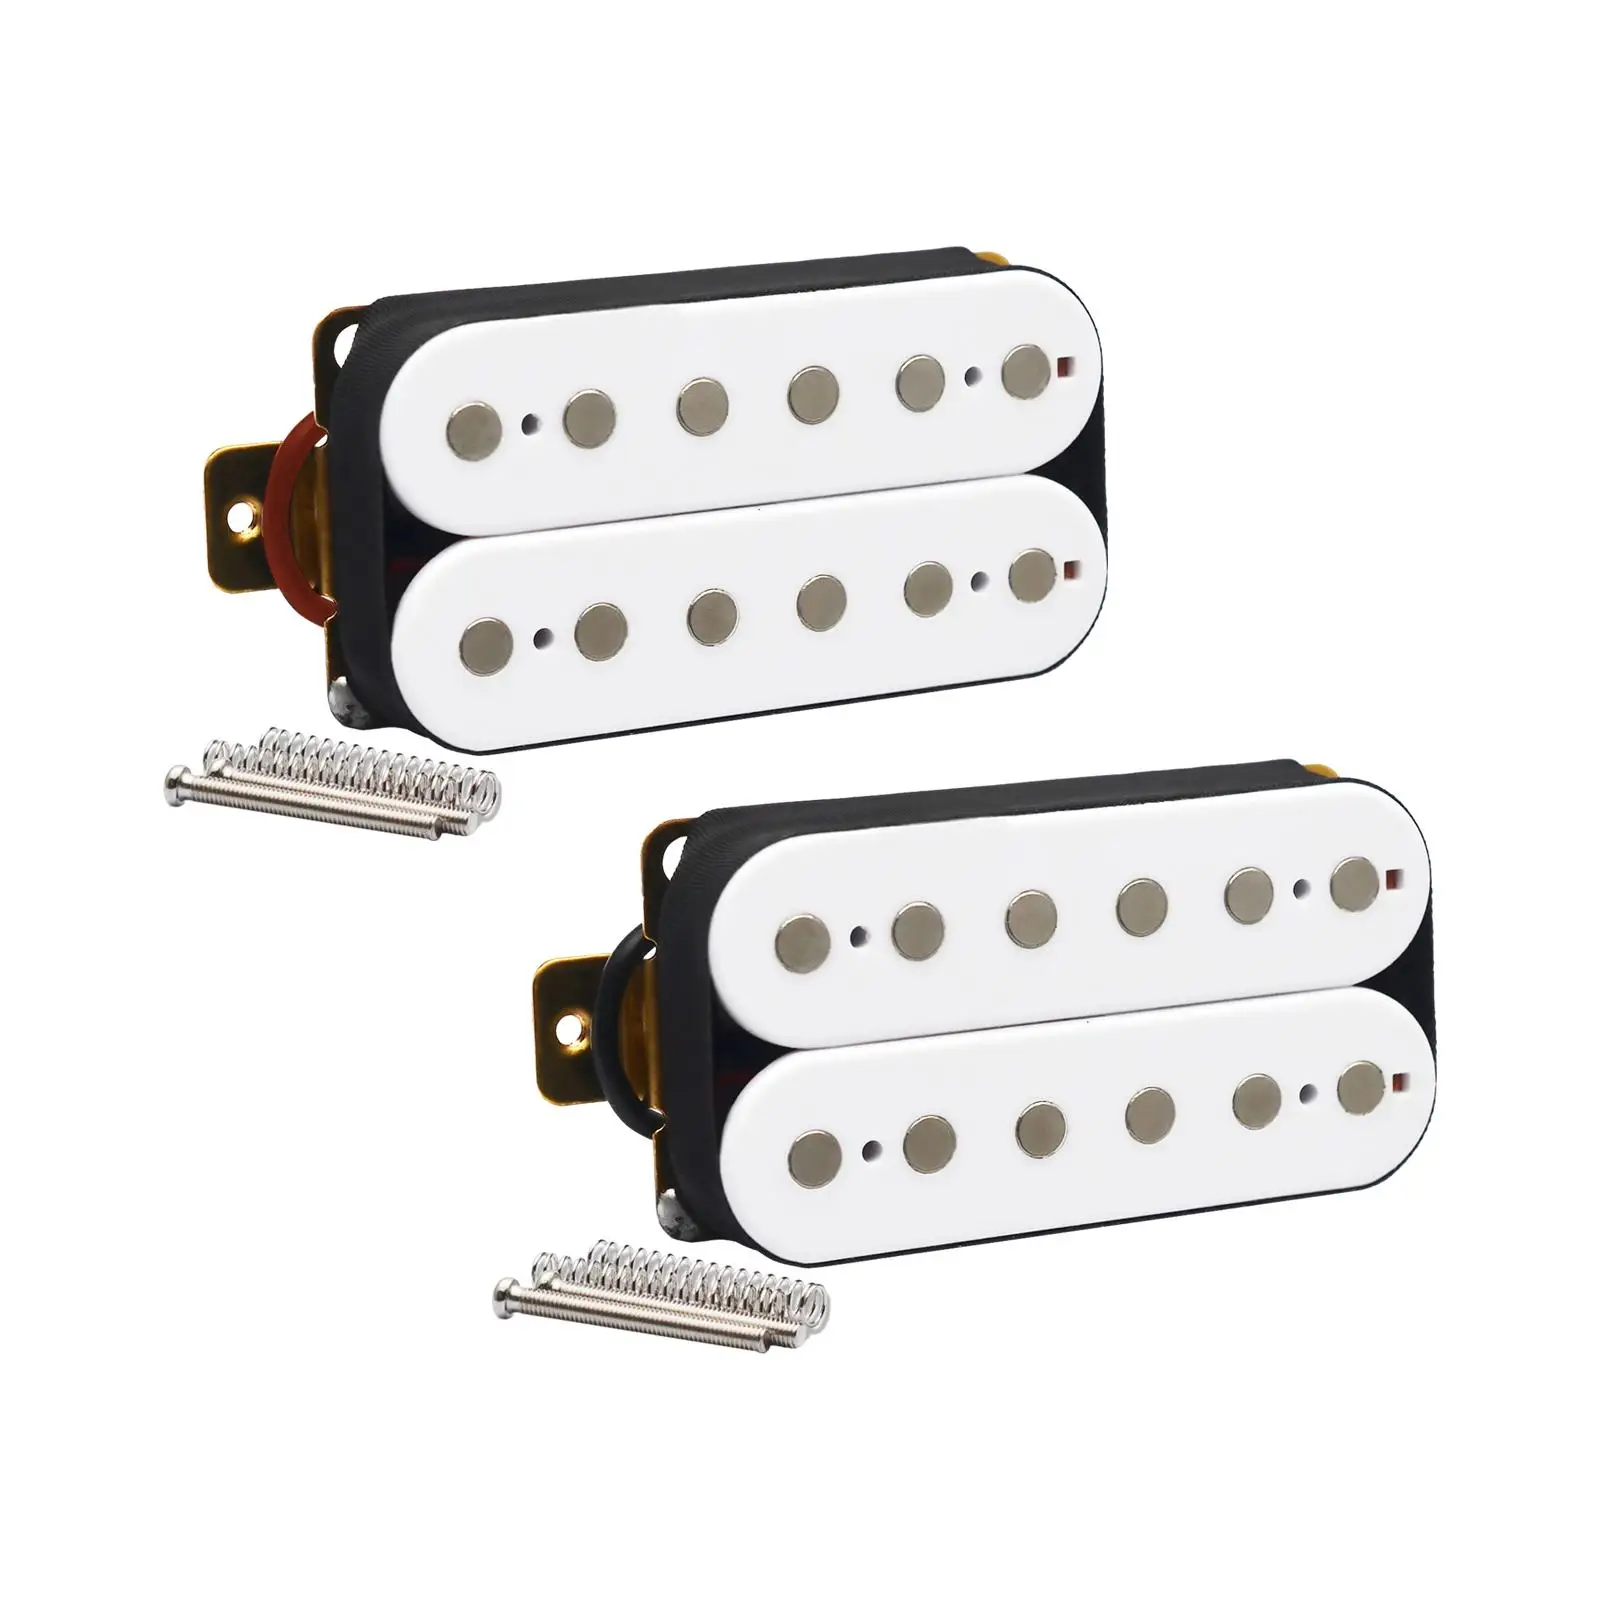 Humbucker Double Coil Pickups Musical Instruments Accessories for 6 Strings Electric Guitar Parts Parts Double Coil Pickup